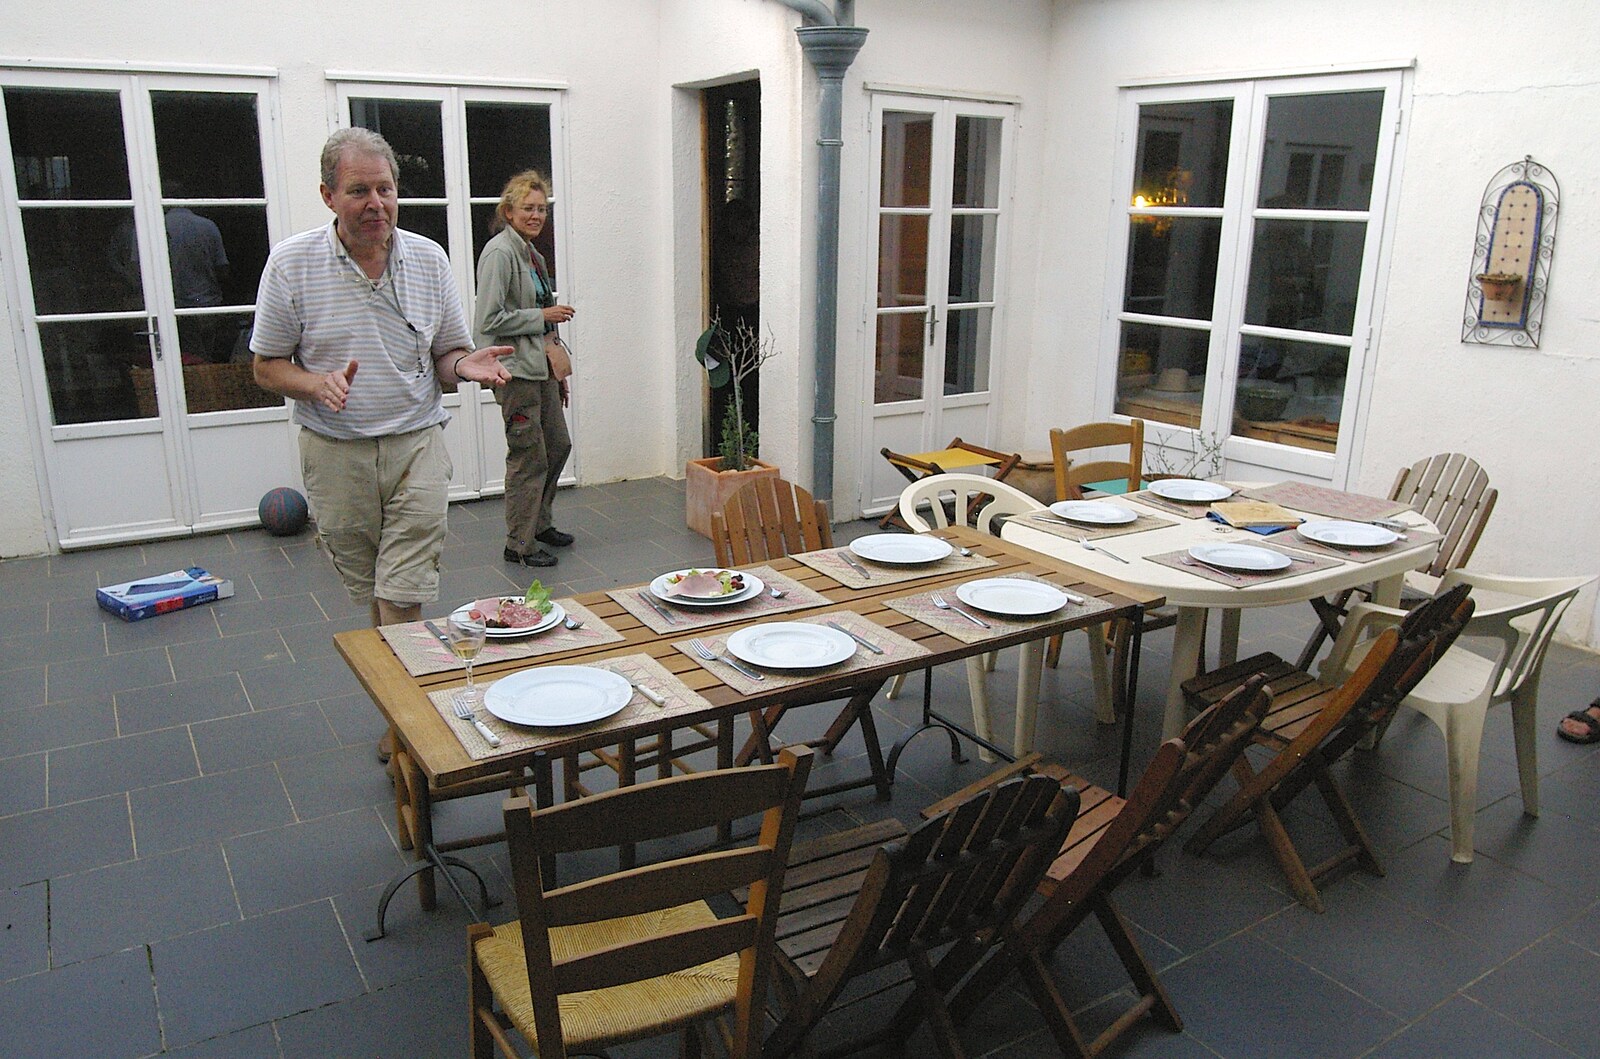 Dirk mills around, preparing for dinner from A Roussillon Farmhouse, Fourques, Perpignan, France - 17th September 2006